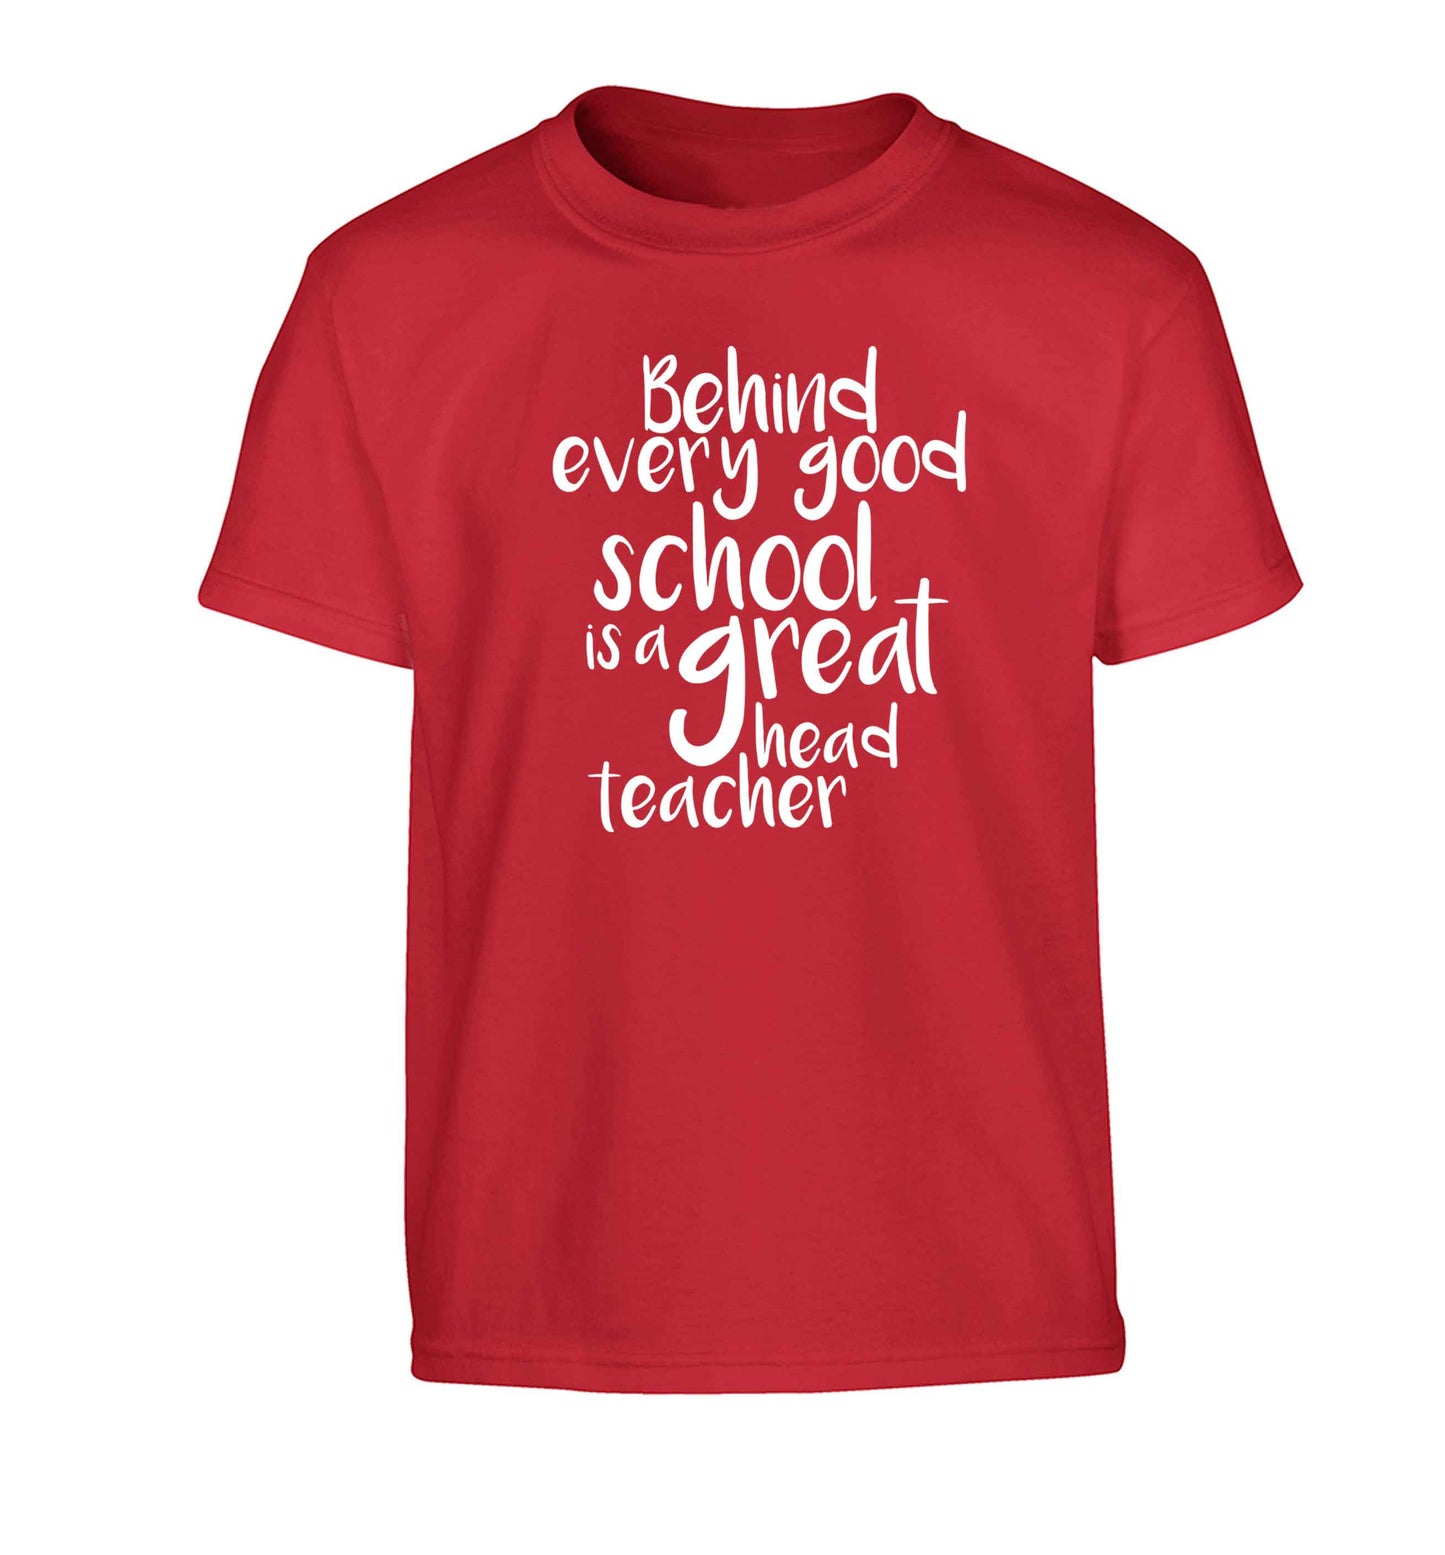 Behind every good school is a great head teacher Children's red Tshirt 12-13 Years